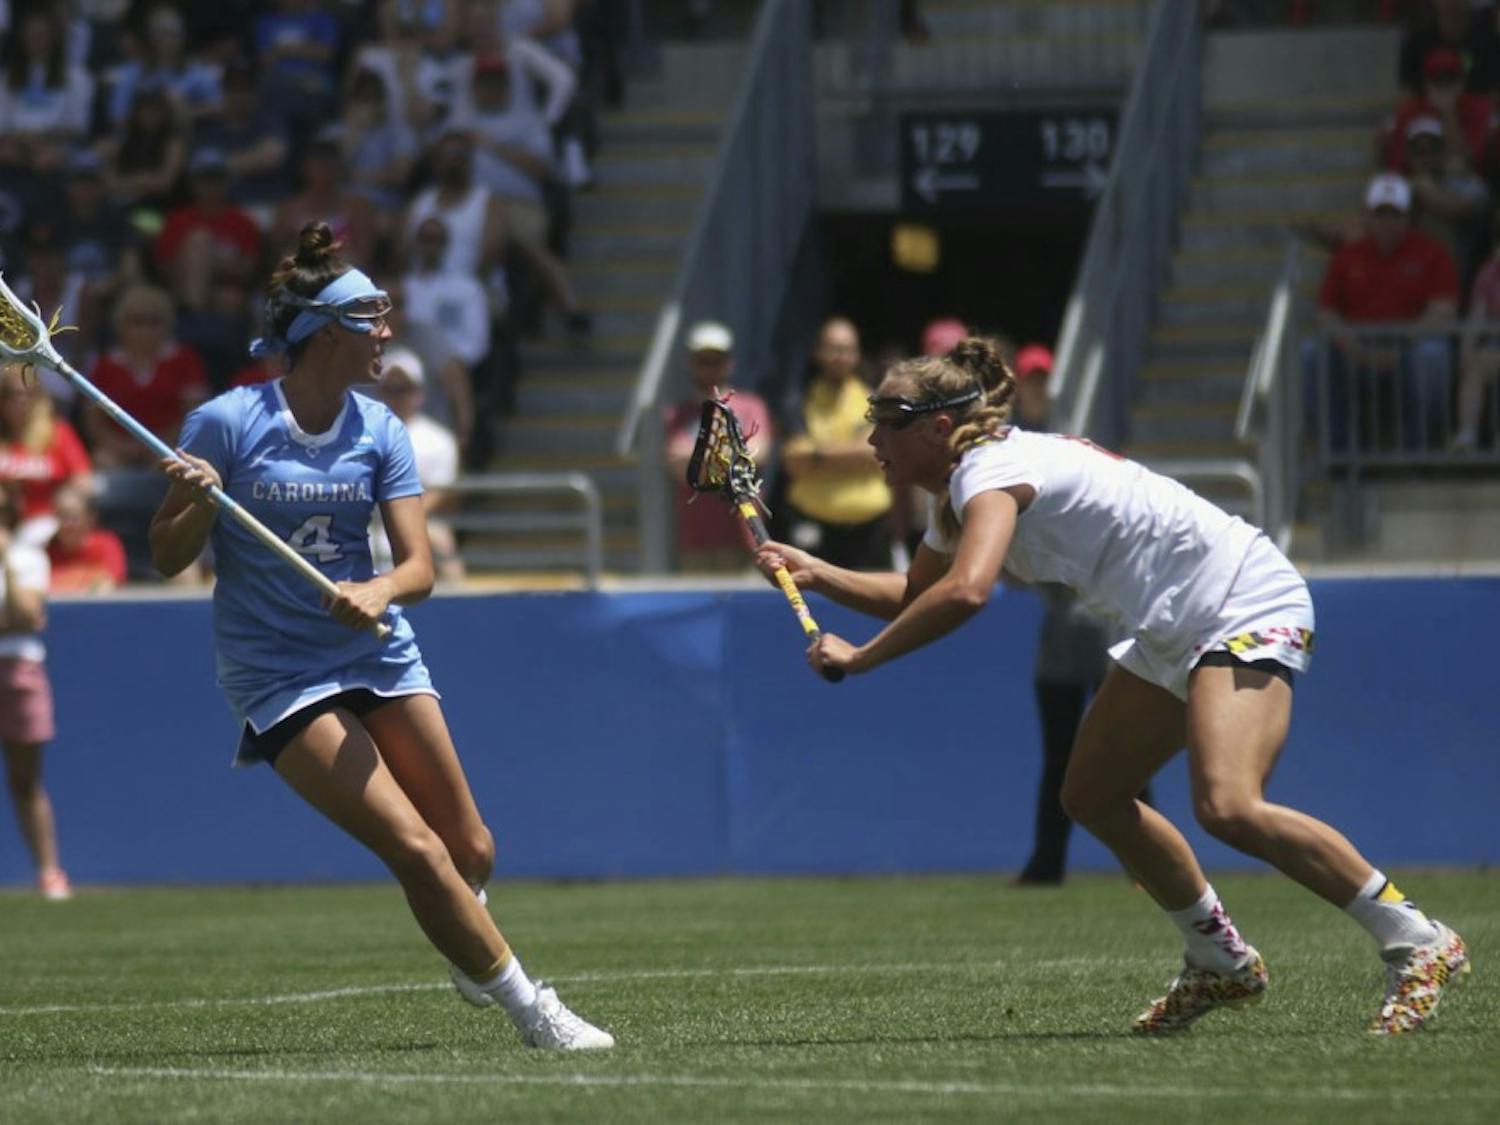 UNC midfielder Marie McCool looks for an open teammate to pass to. The North Carolina women's lacrosse team defeated Maryland 13-7 to capture the NCAA championship on May 29, 2016&nbsp;at Talen Energy Stadium in Chester, PA.